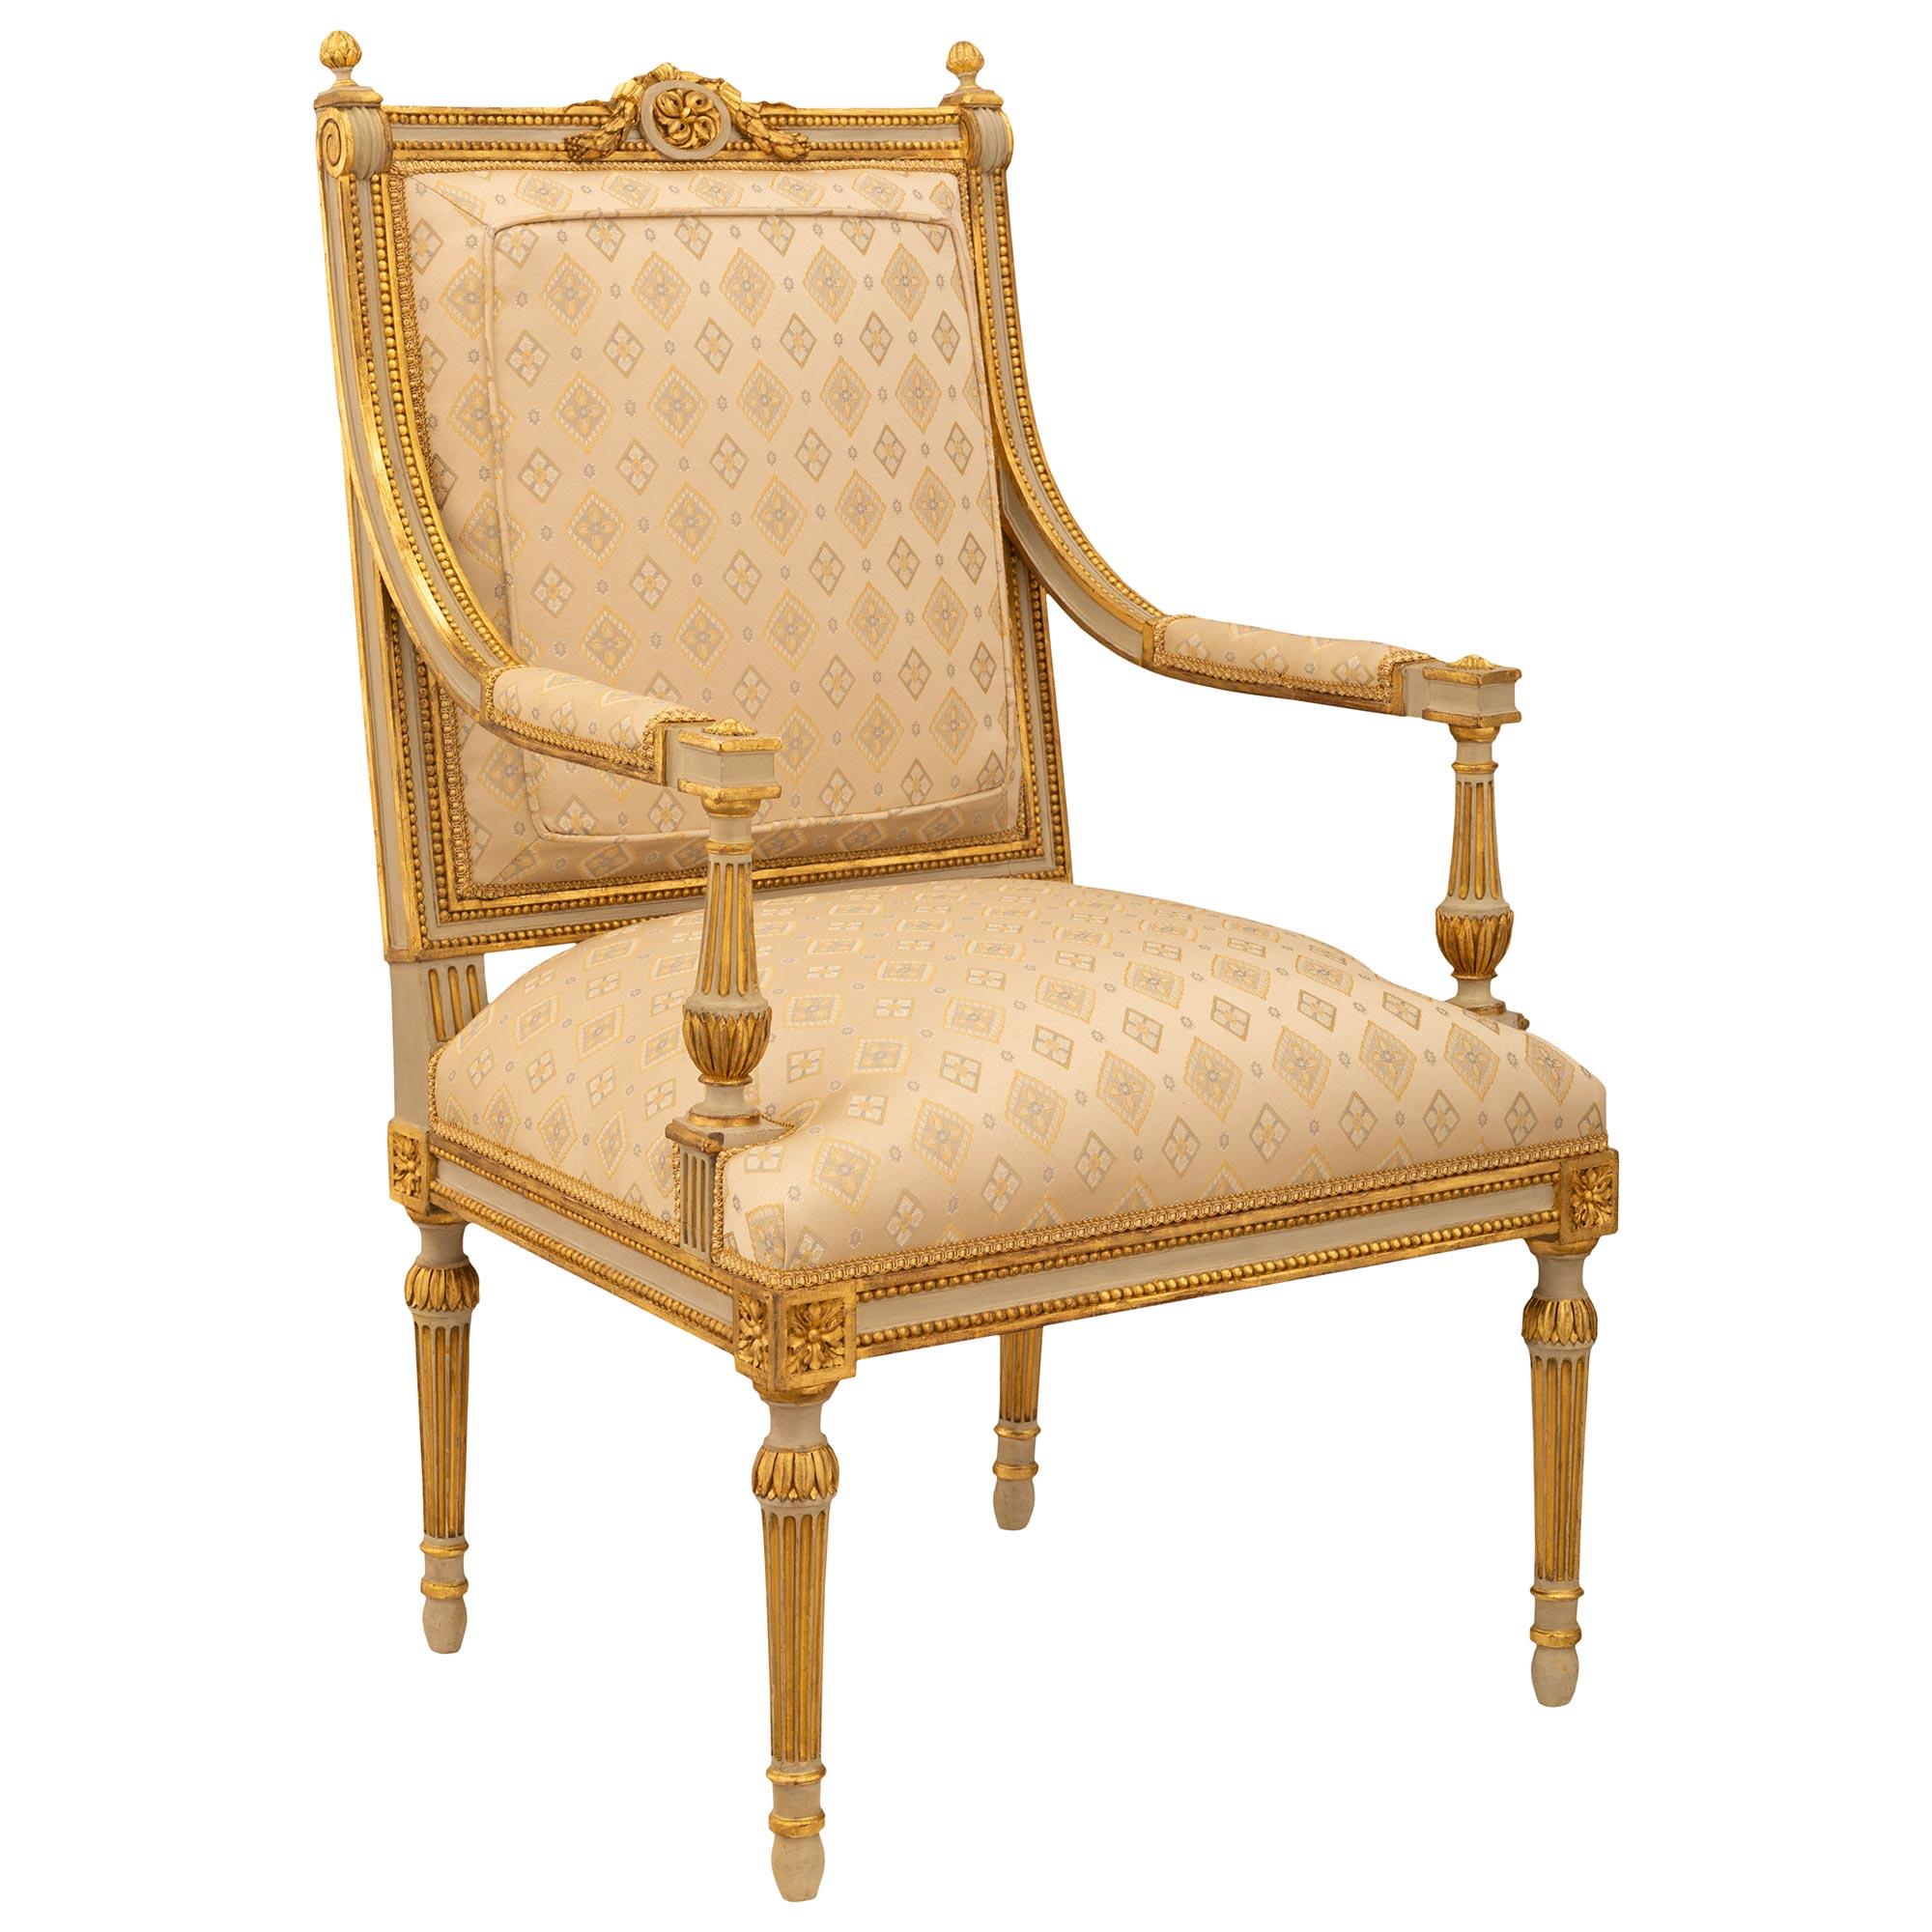 A sensational set of four French 19th century Louis XVI st. Napoleon III Period patinated and Giltwood armchairs. The set are raised by elegant circular fluted tapered legs ending with ball feet while at the top is a Giltwood band of palmettes.